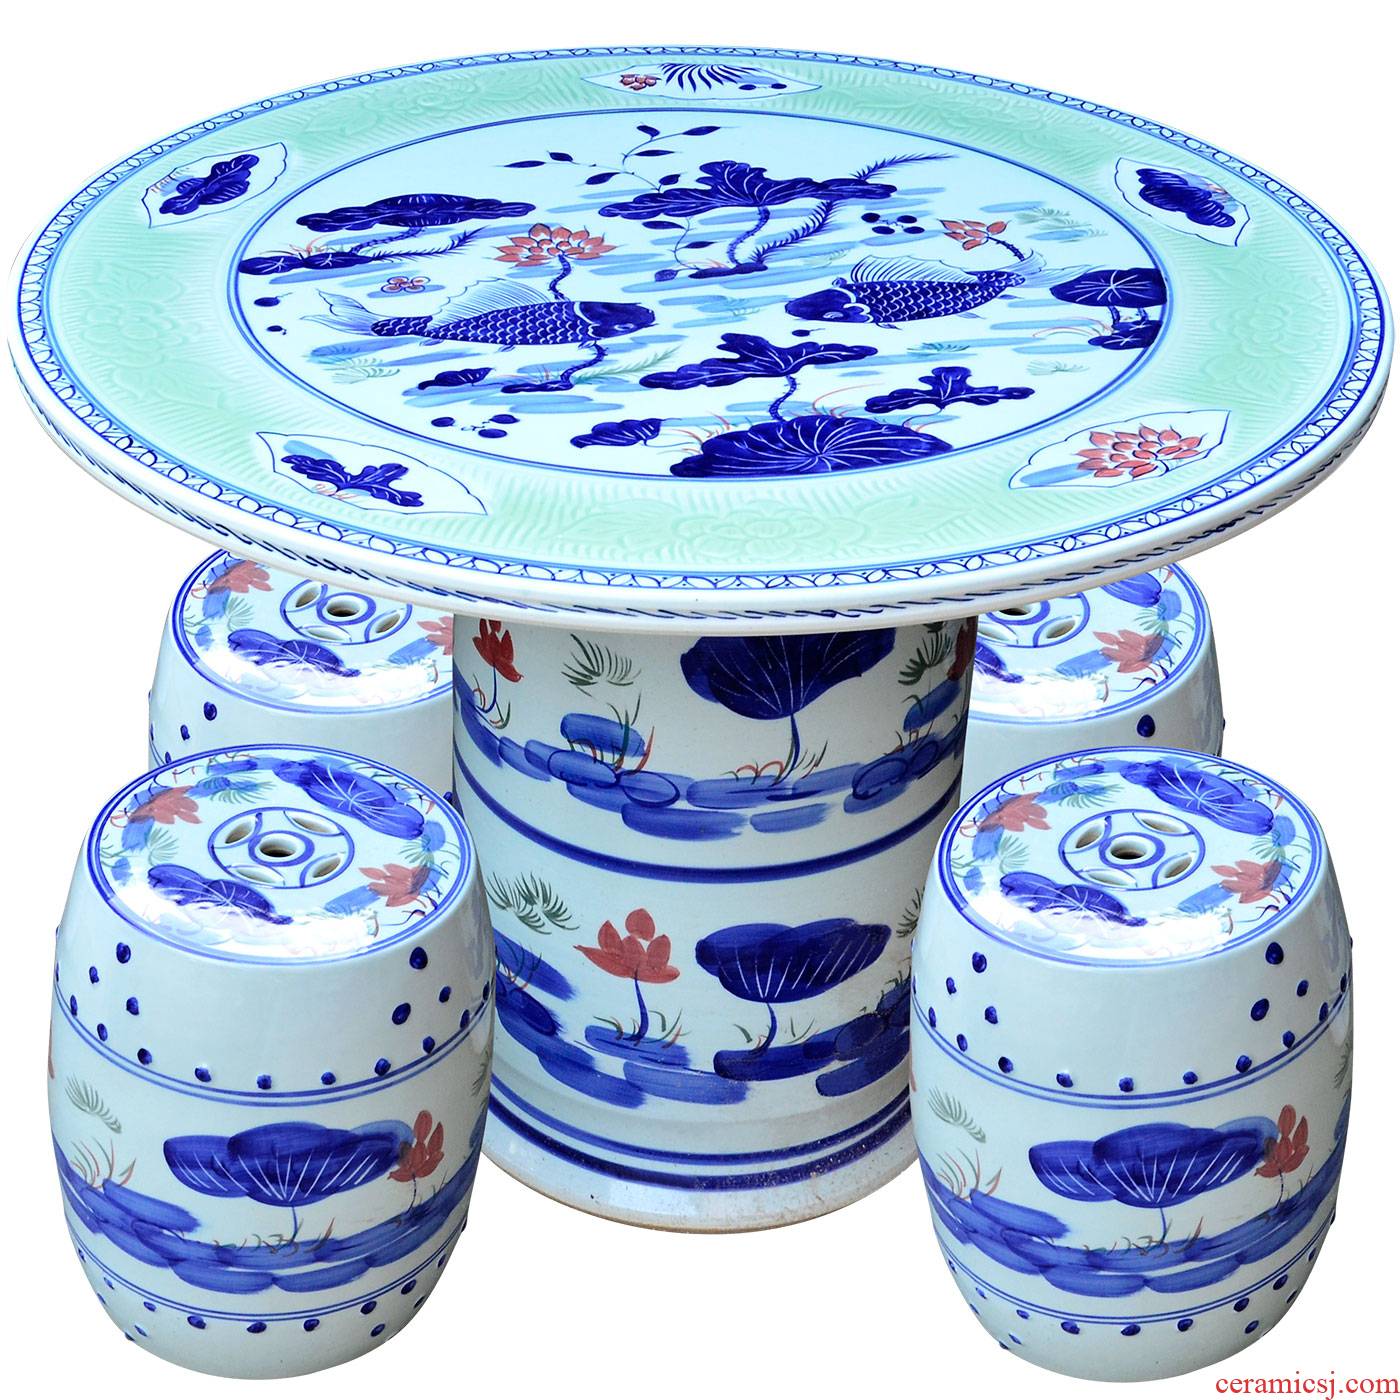 Jingdezhen ceramics archaize ceramic table who suit is suing garden decorative garden balcony garden chairs and tables